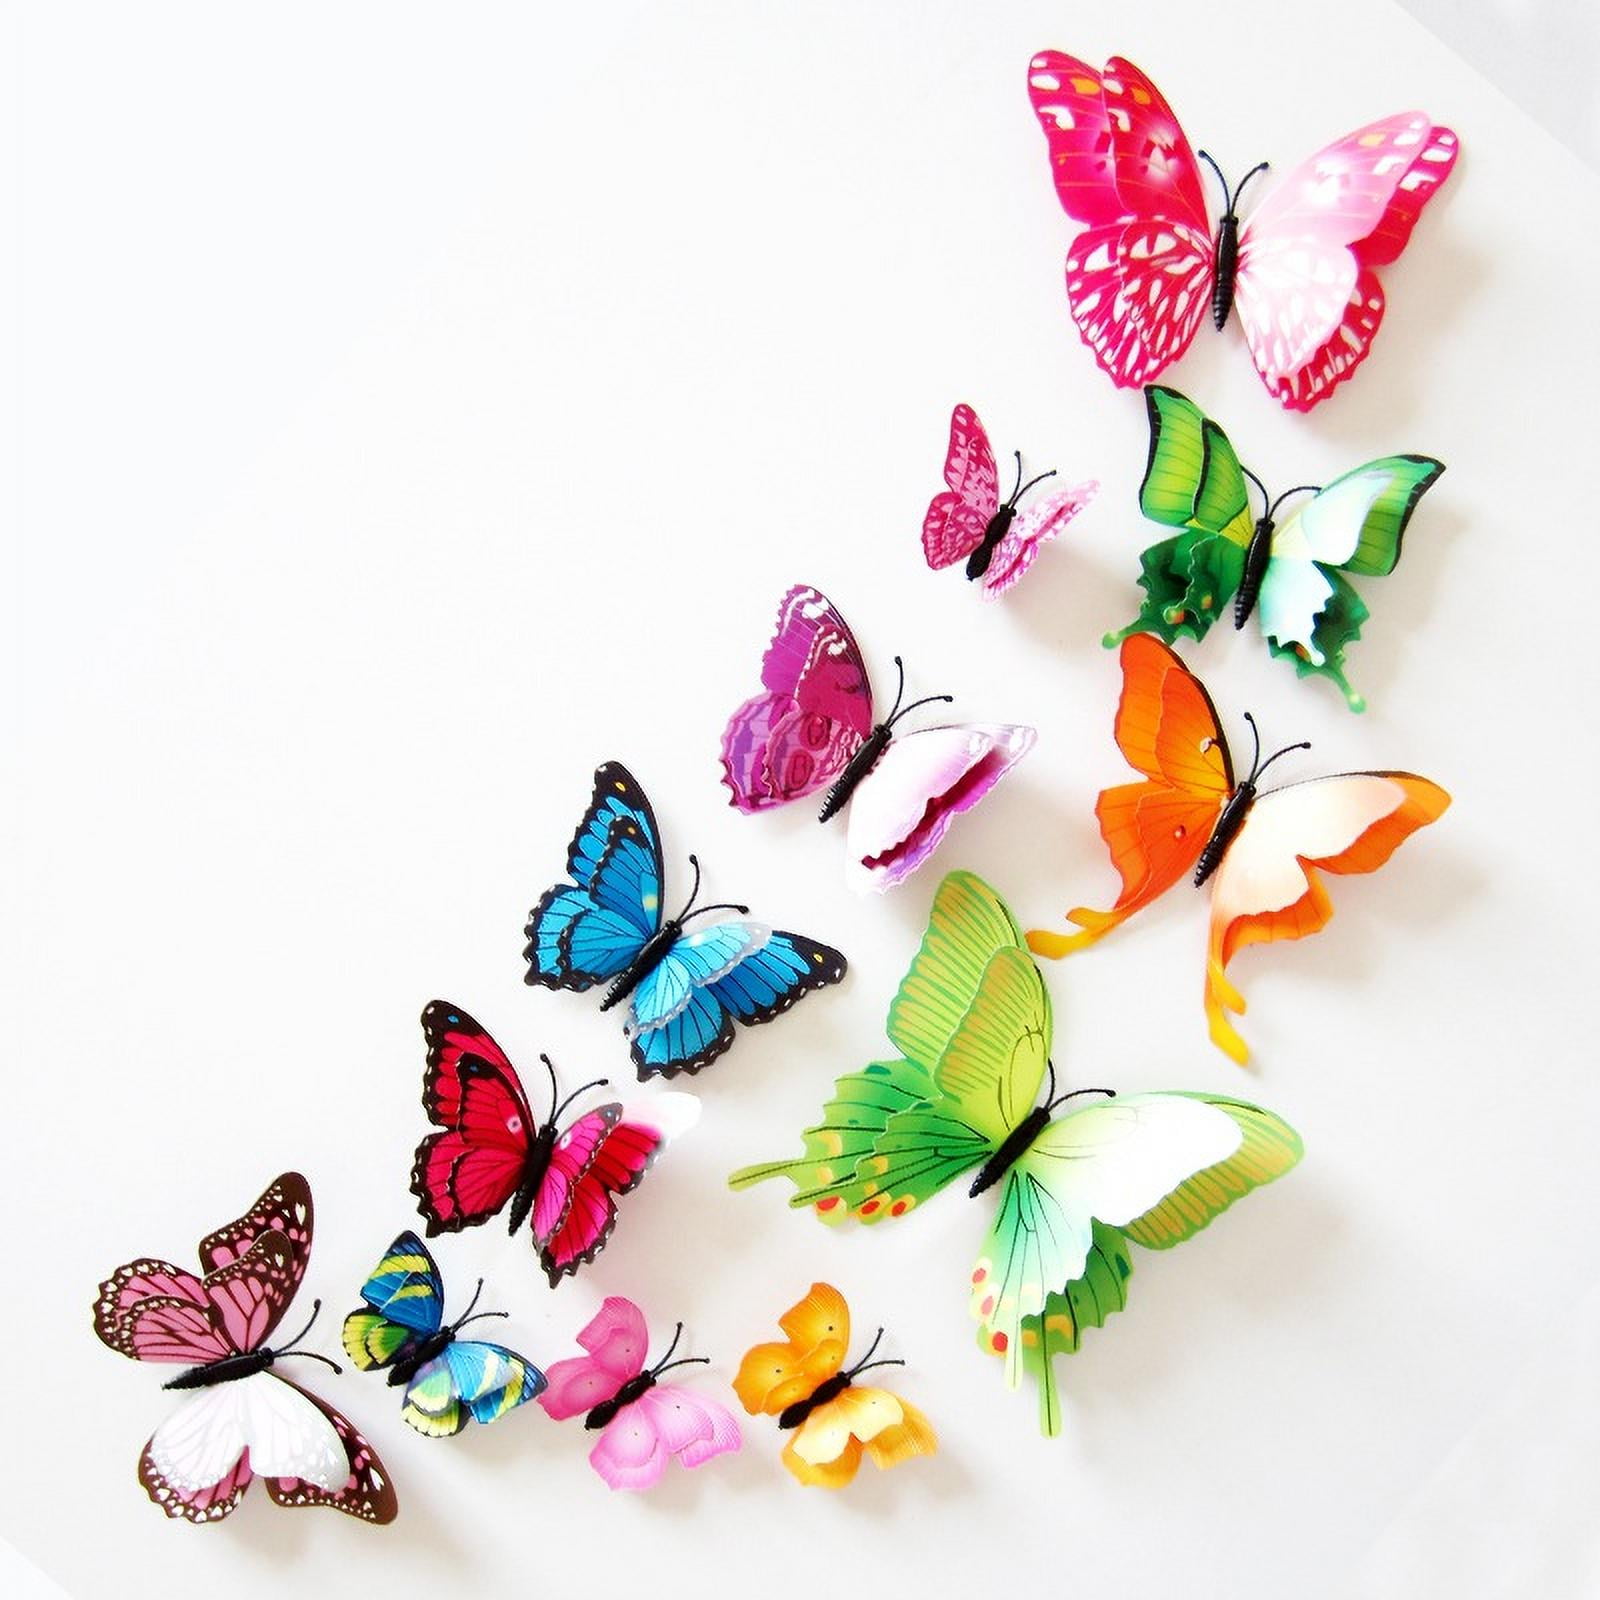 Home Decor Decal Wall Stickers Home Decorations 3D Butterfly Rainbow DIY Sticker 